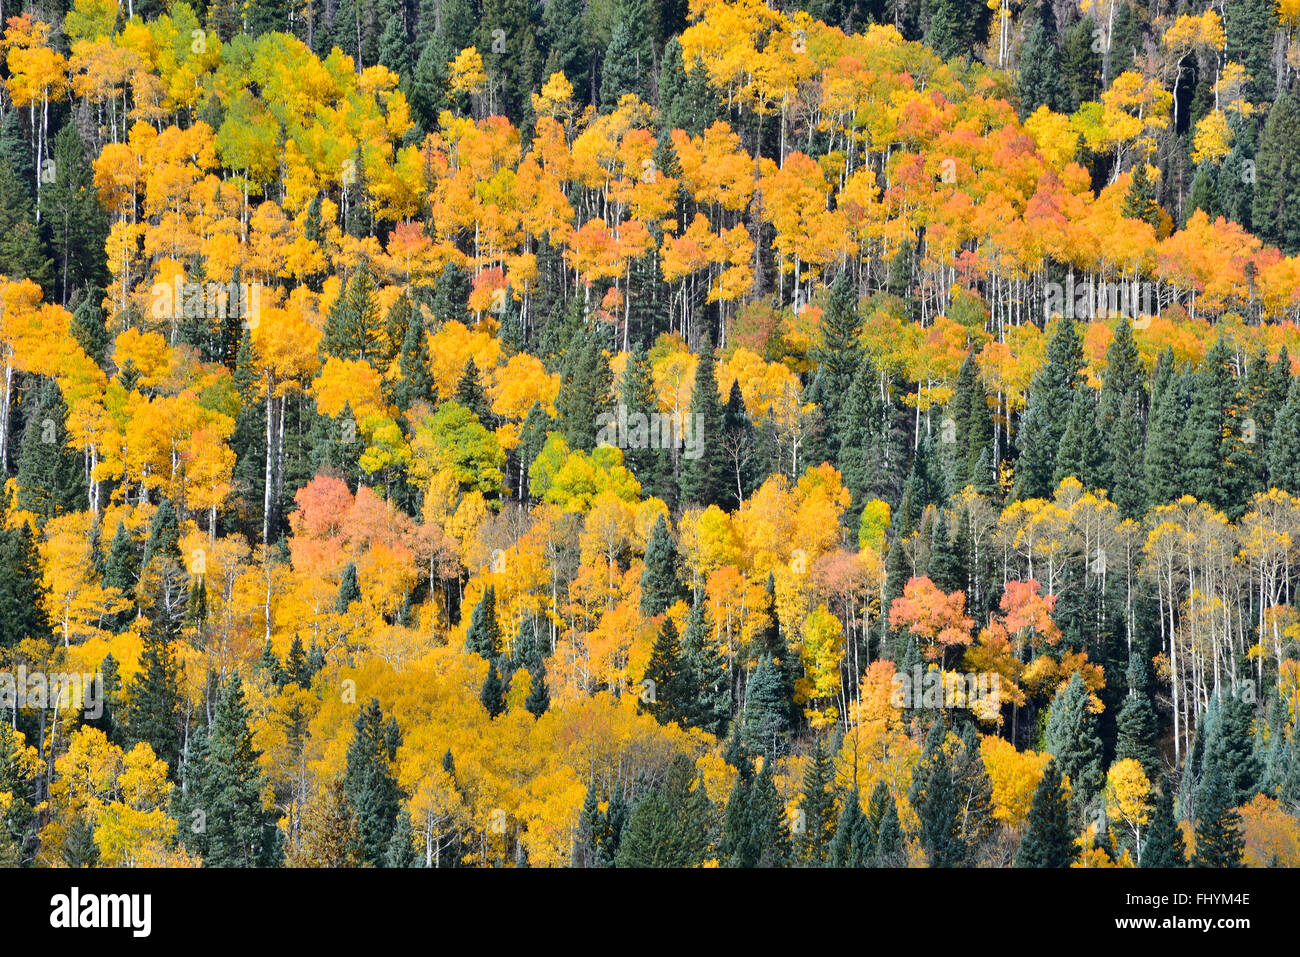 Fall color views along Forest Road 858 to Owl Creek Pass about 20 miles west of Ridgway, Colorado, and in Big Cimarron Stock Photo